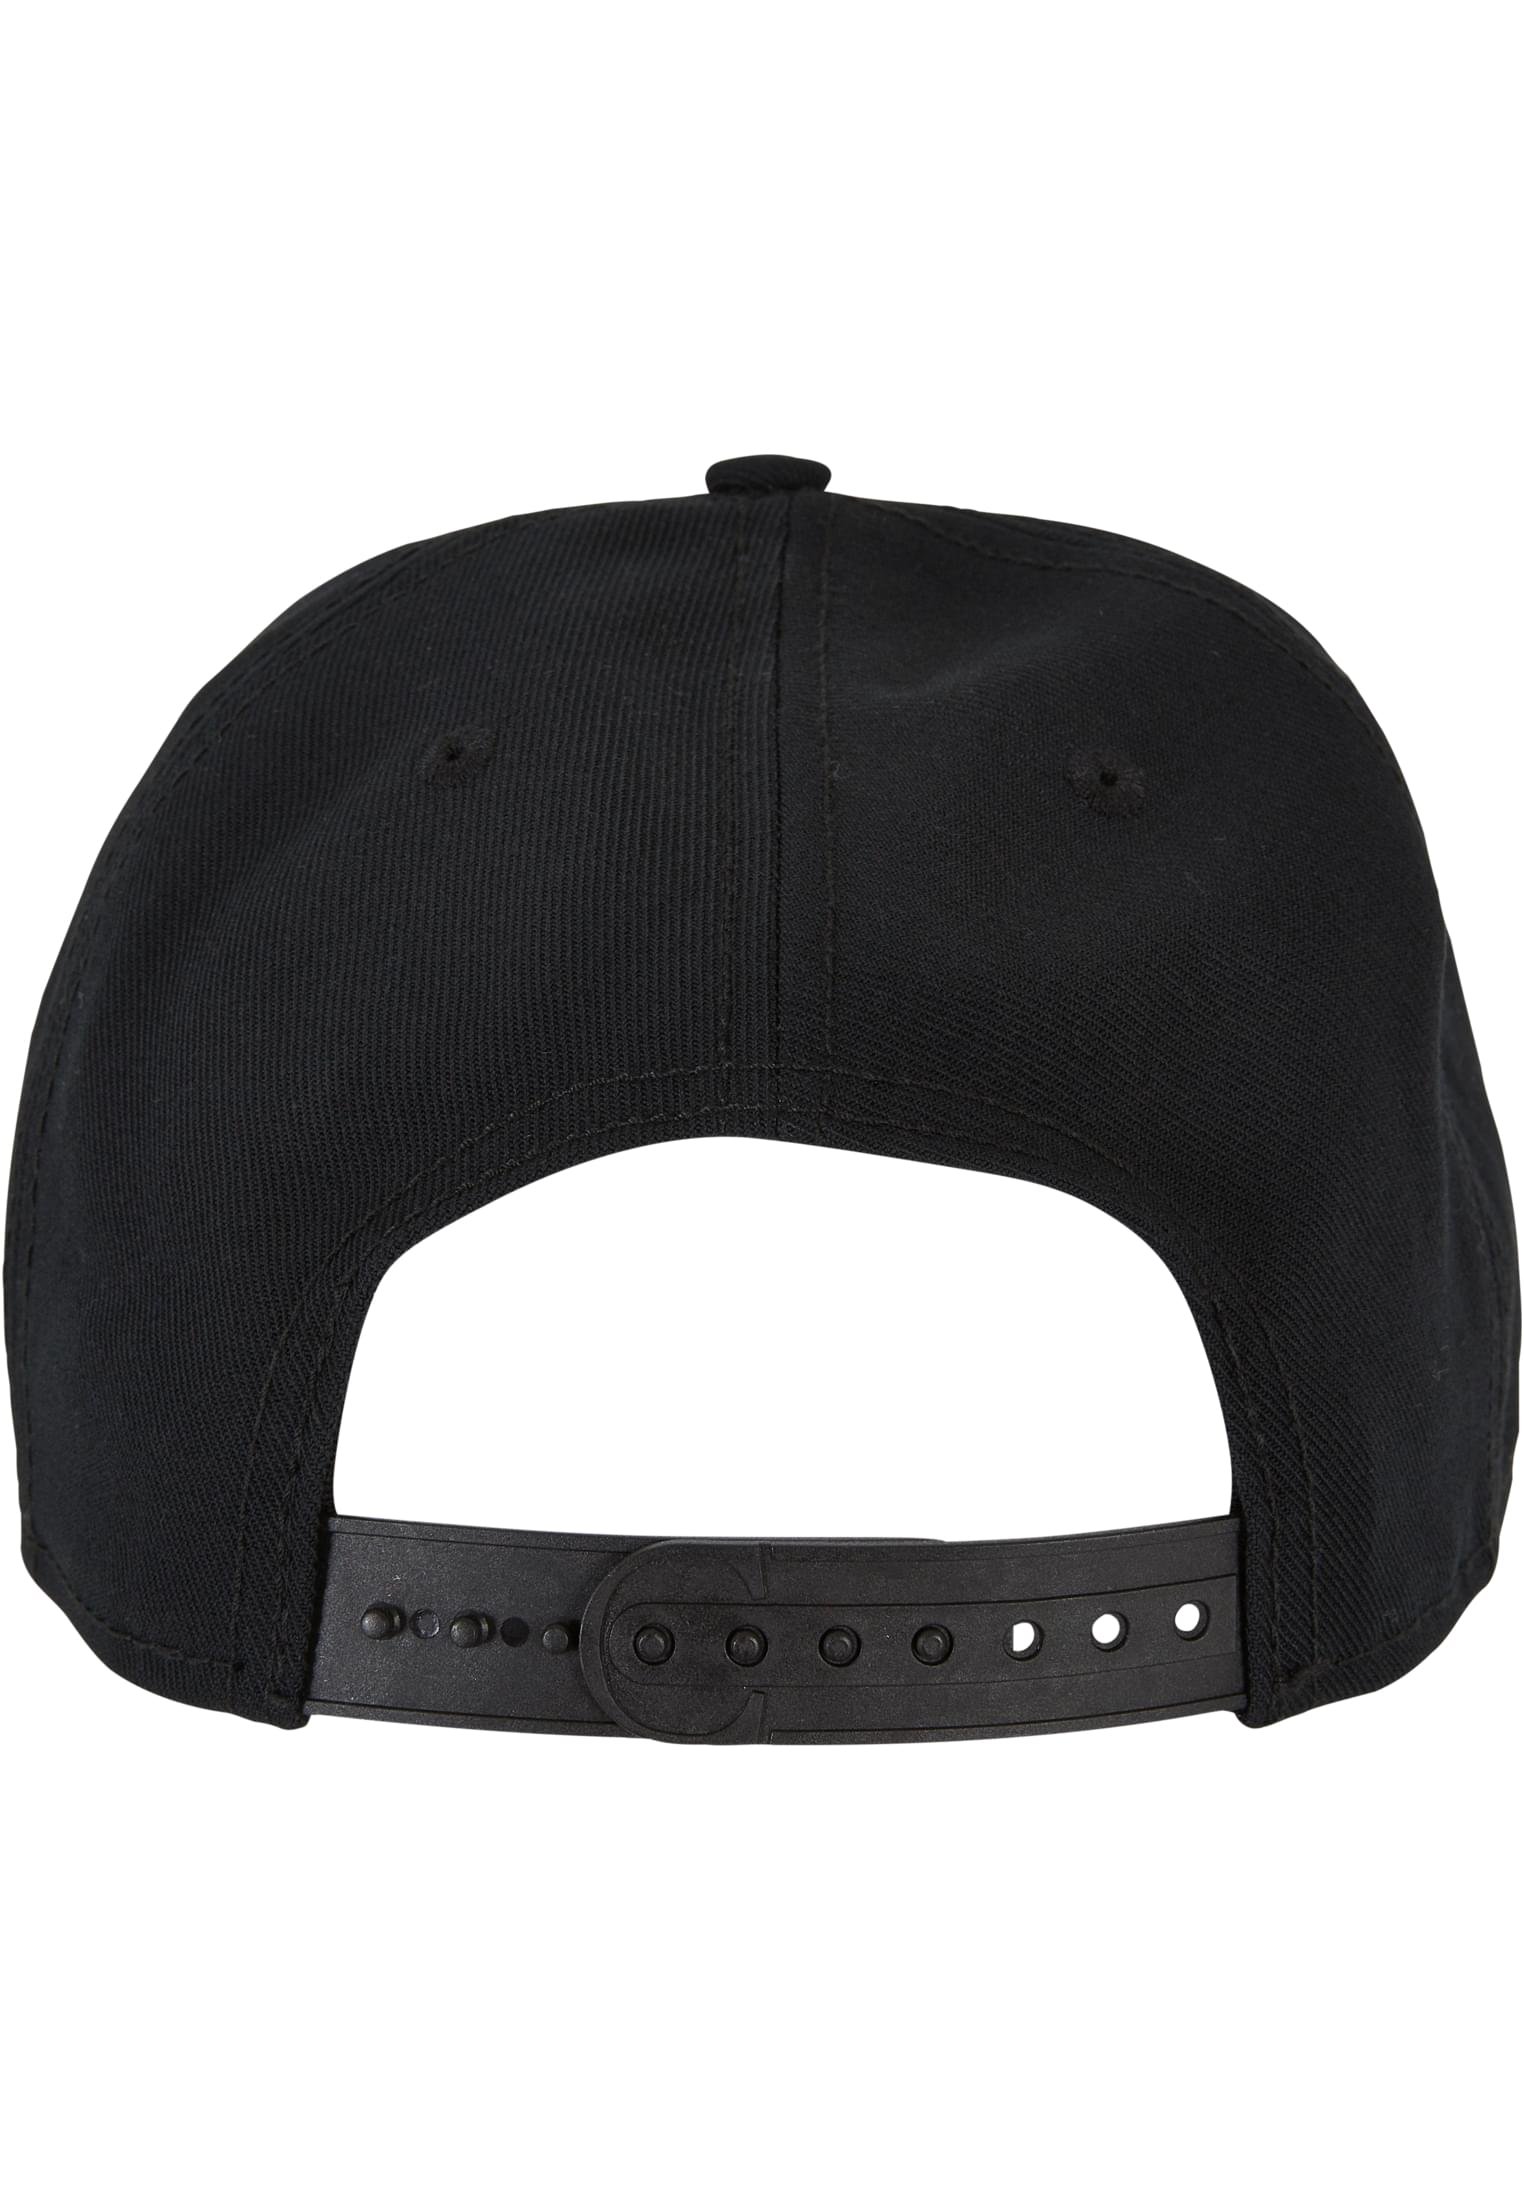 Colorful Hood  P Cap black one size